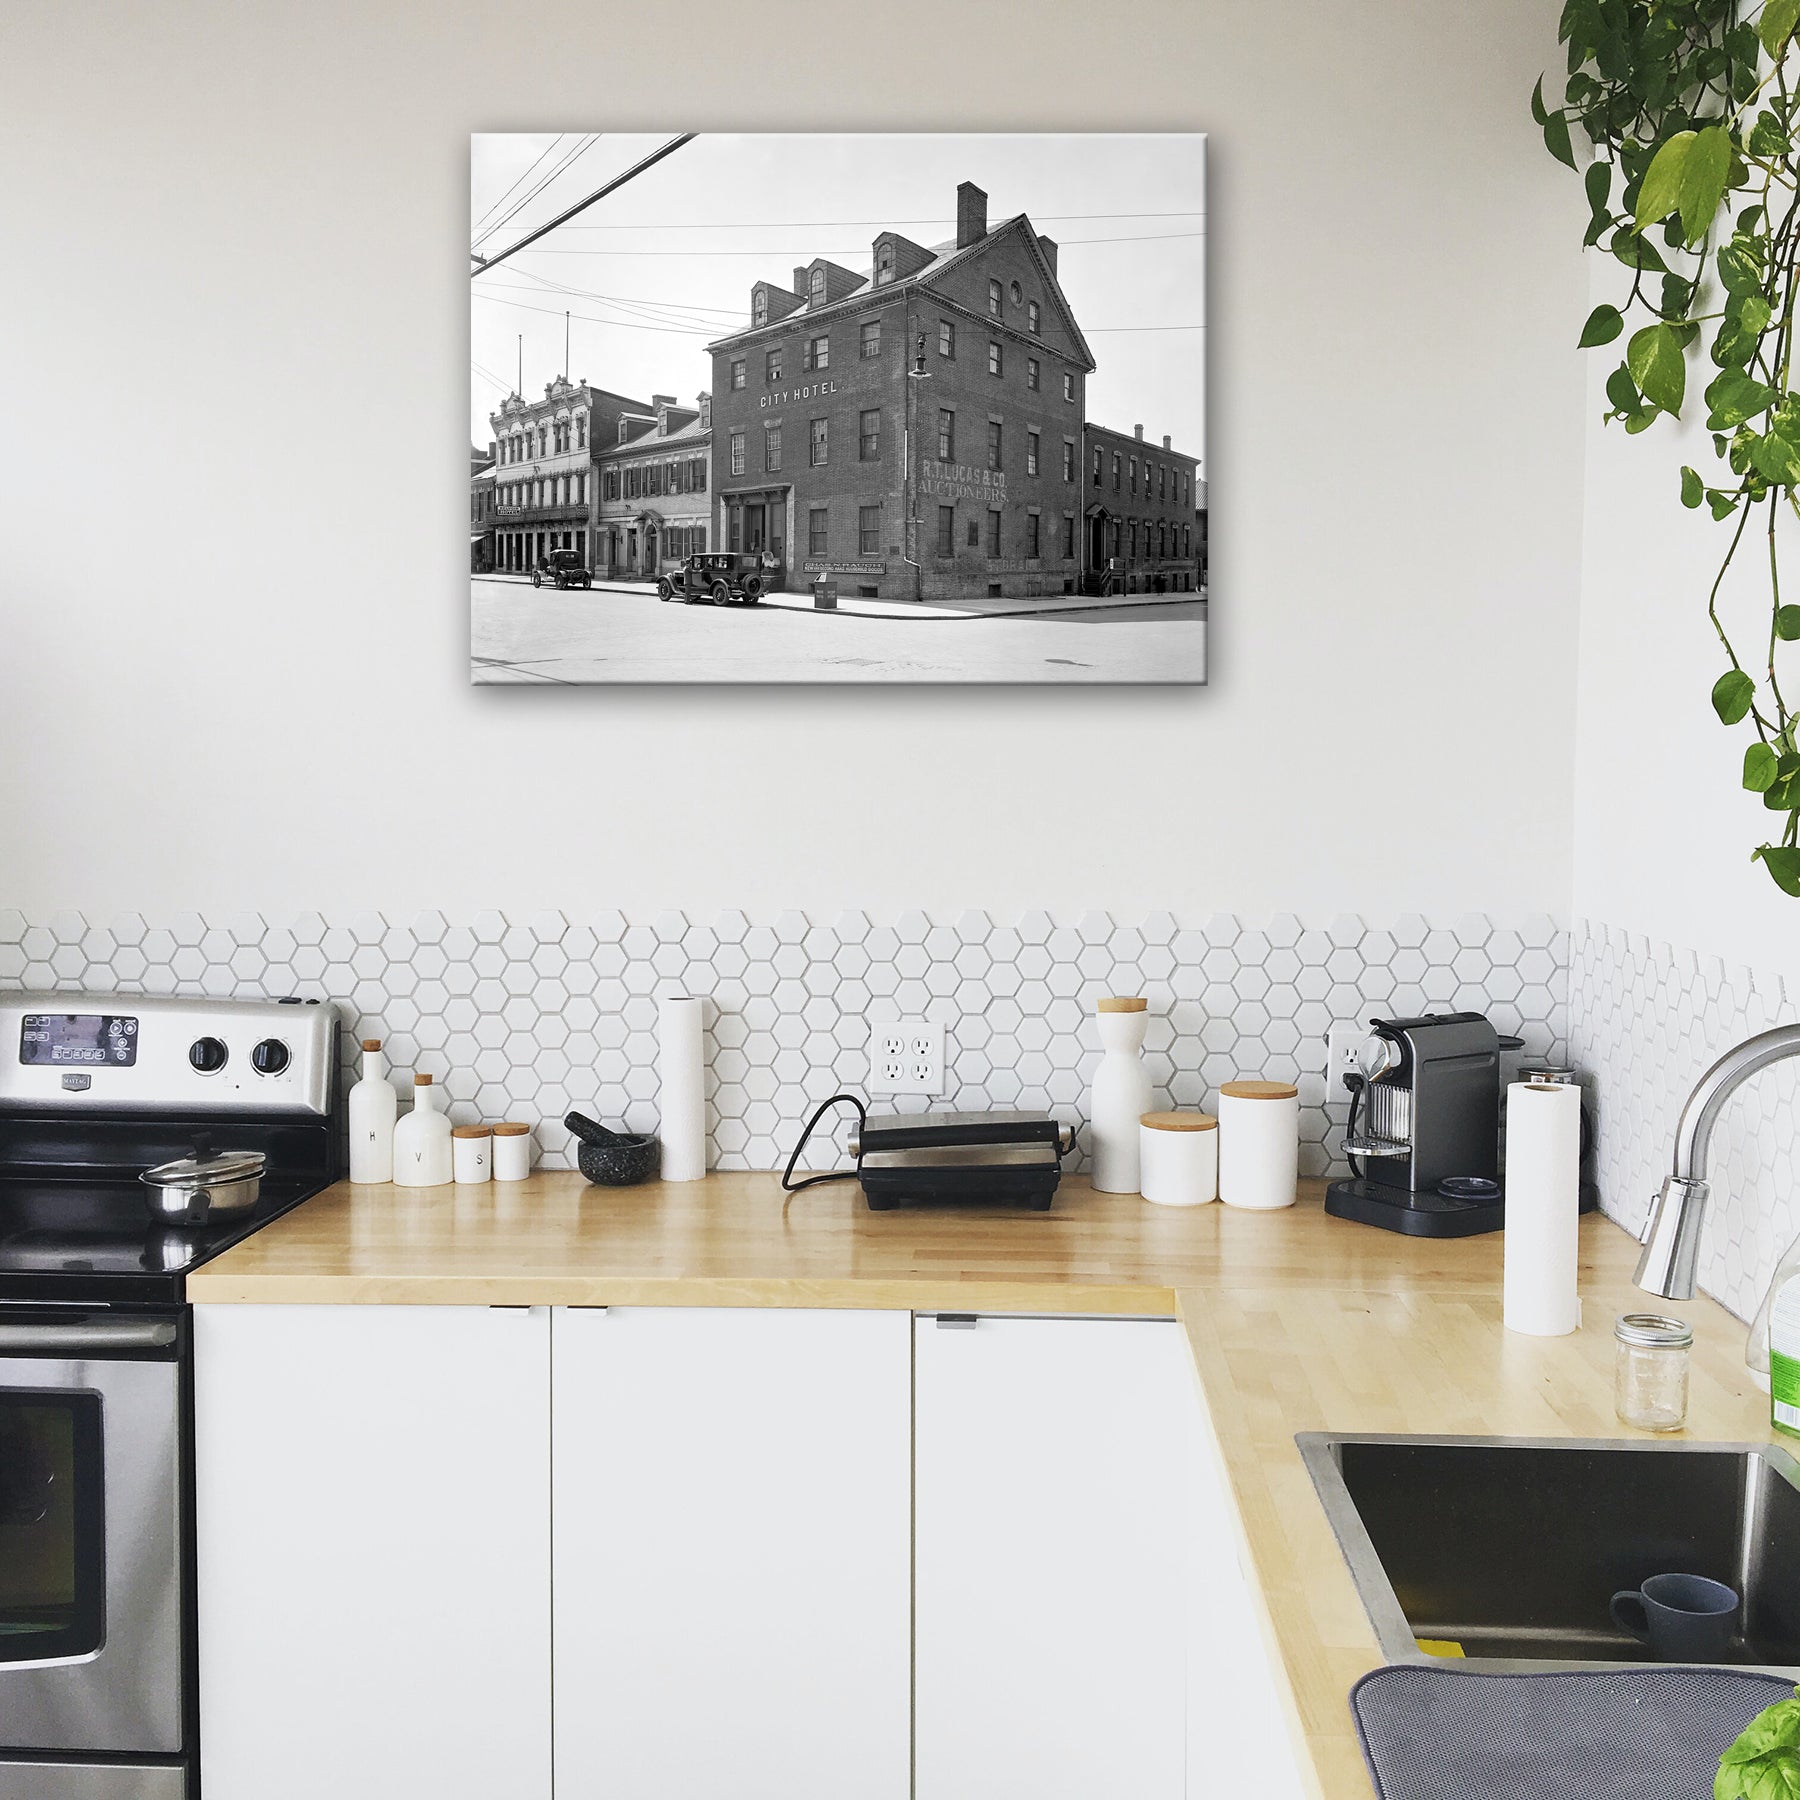 A sleek kitchen with a canvas print on the wall, featuring vintage photography of Old Town